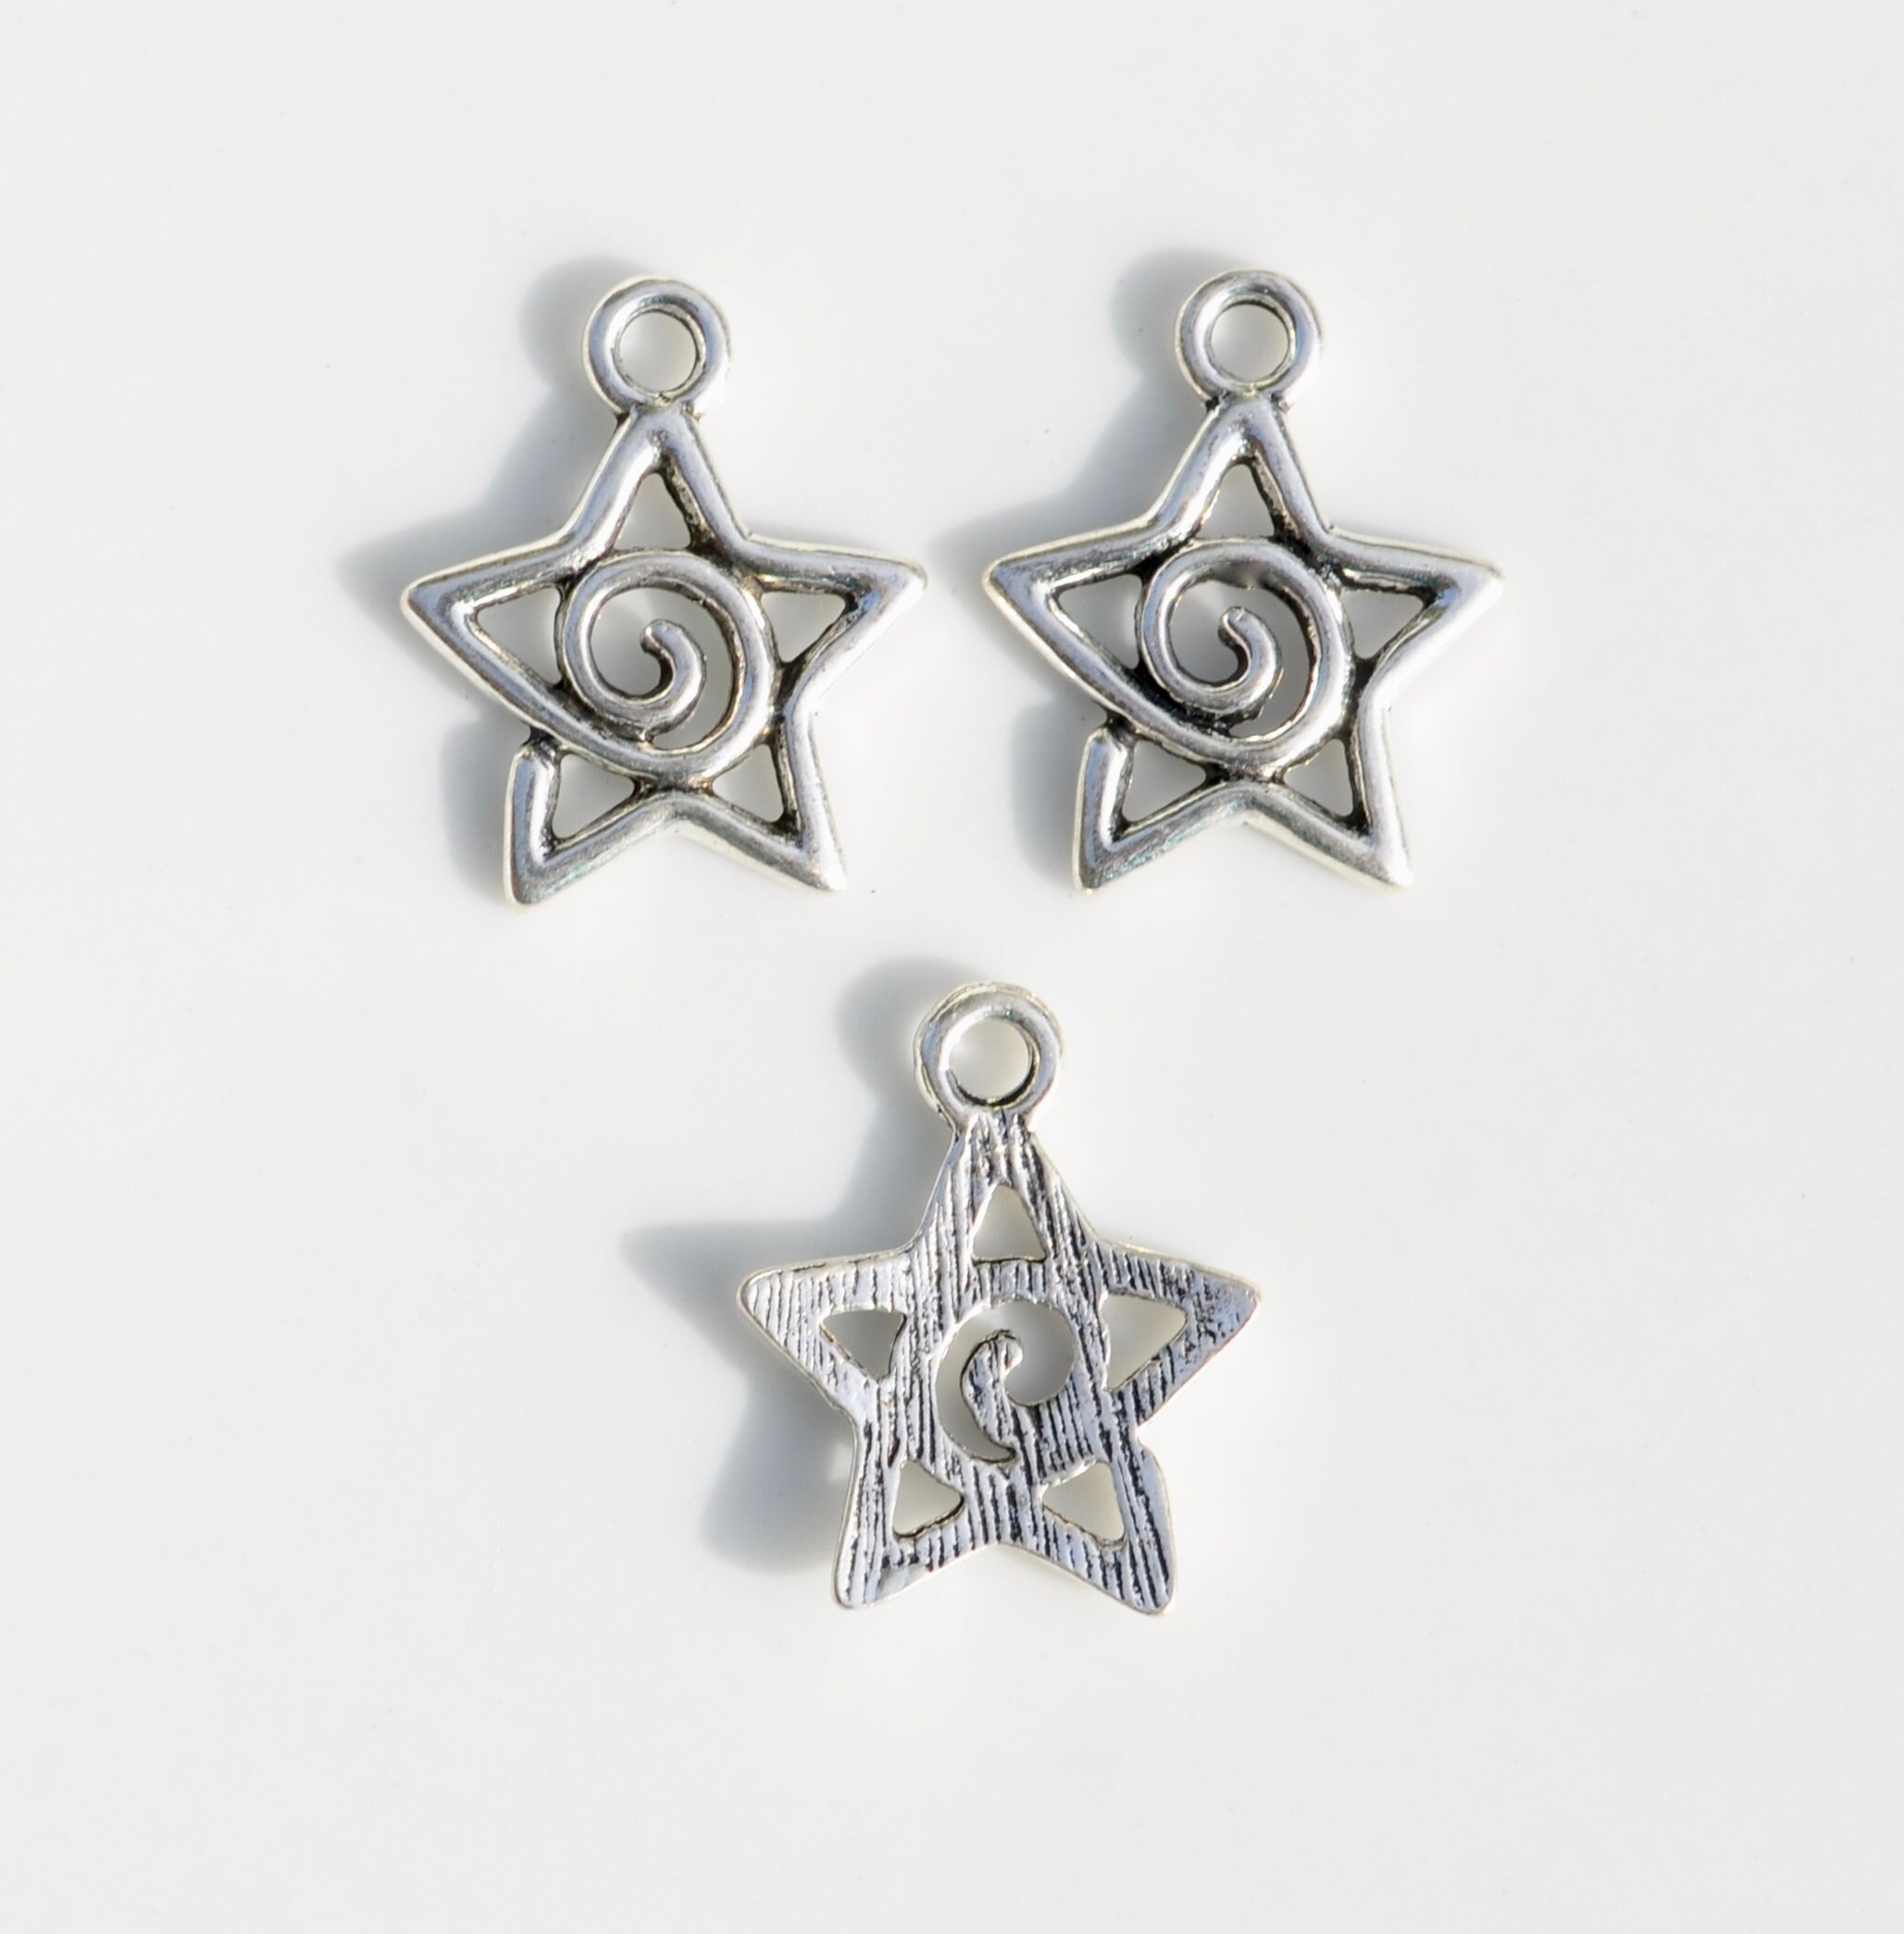 4, 20 or 50 Bulk Silver Star Charms, Open, Double Sided Celestial, Small Star Charm, 12mm | Ships Immediately from USA | SL151